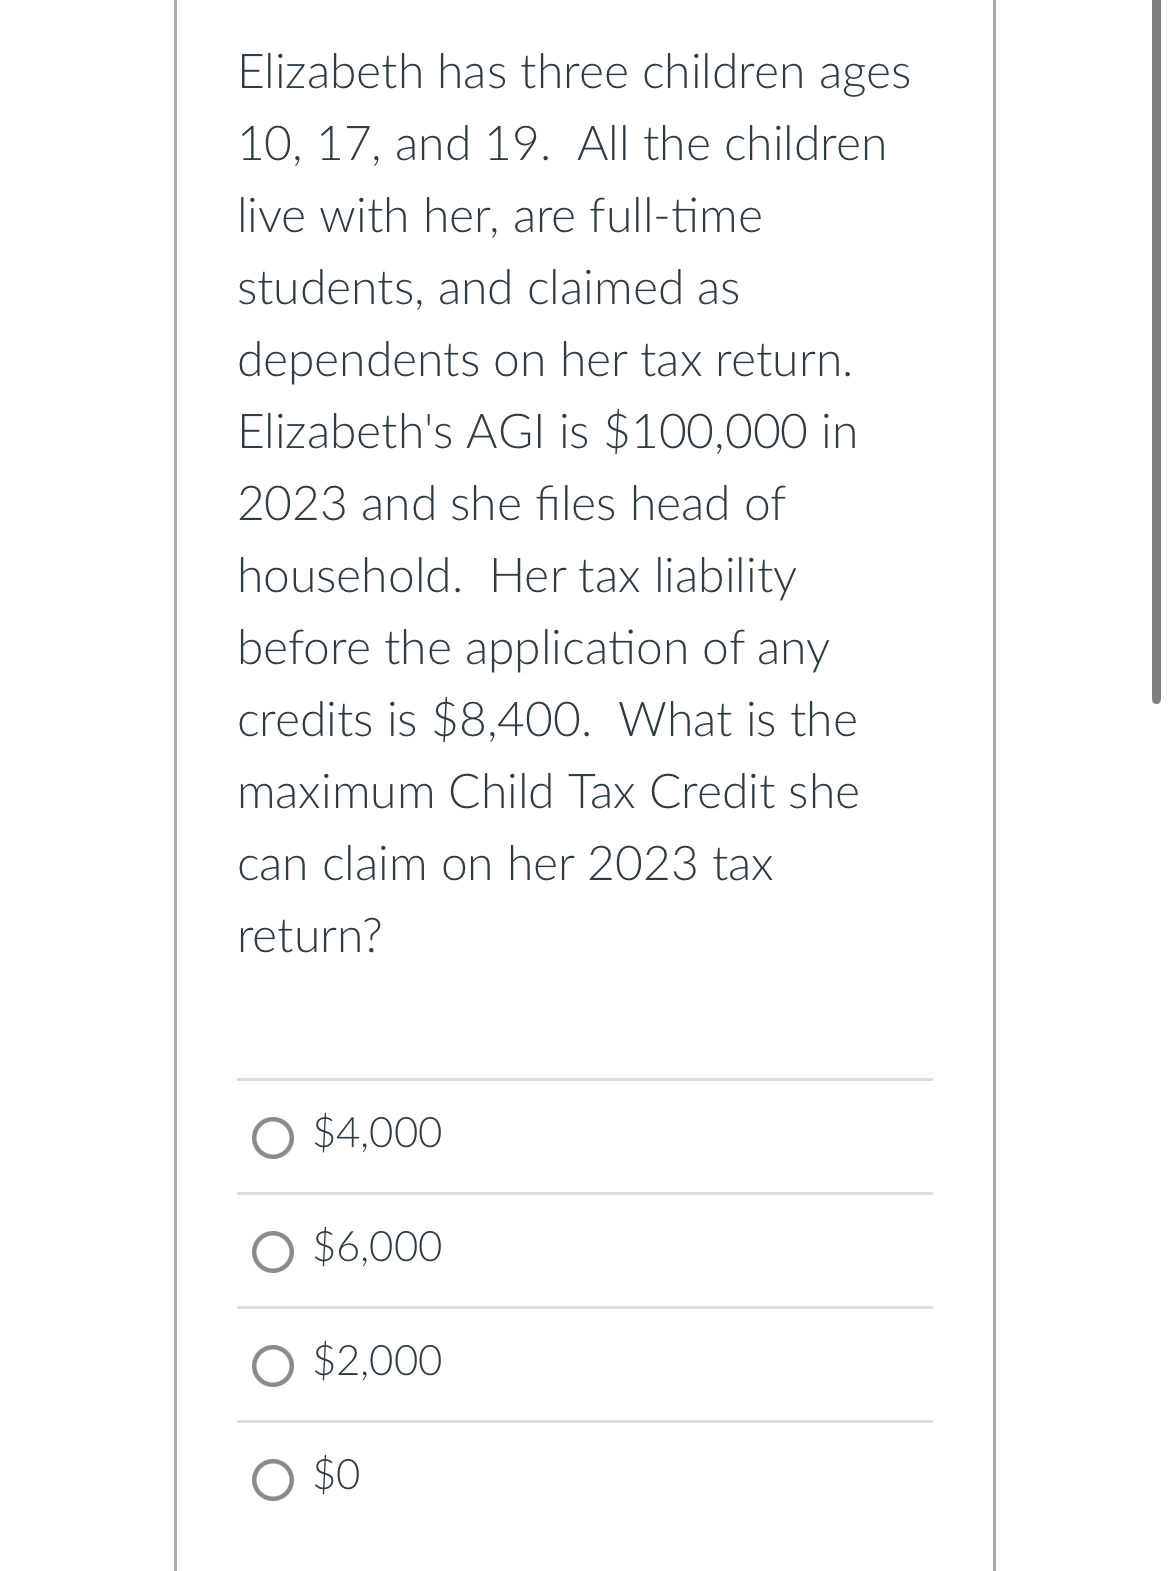 Elizabeth has three children ages
10, 17, and 19. All the children
live with her, are full-time
students, and claimed as
dependents on her tax return.
Elizabeth's AGI is $100,000 in
2023 and she files head of
household. Her tax liability
before the application of any
credits is $8,400. What is the
maximum Child Tax Credit she
can claim on her 2023 tax
return?
$4.000
O $6,000
$2,000
$0